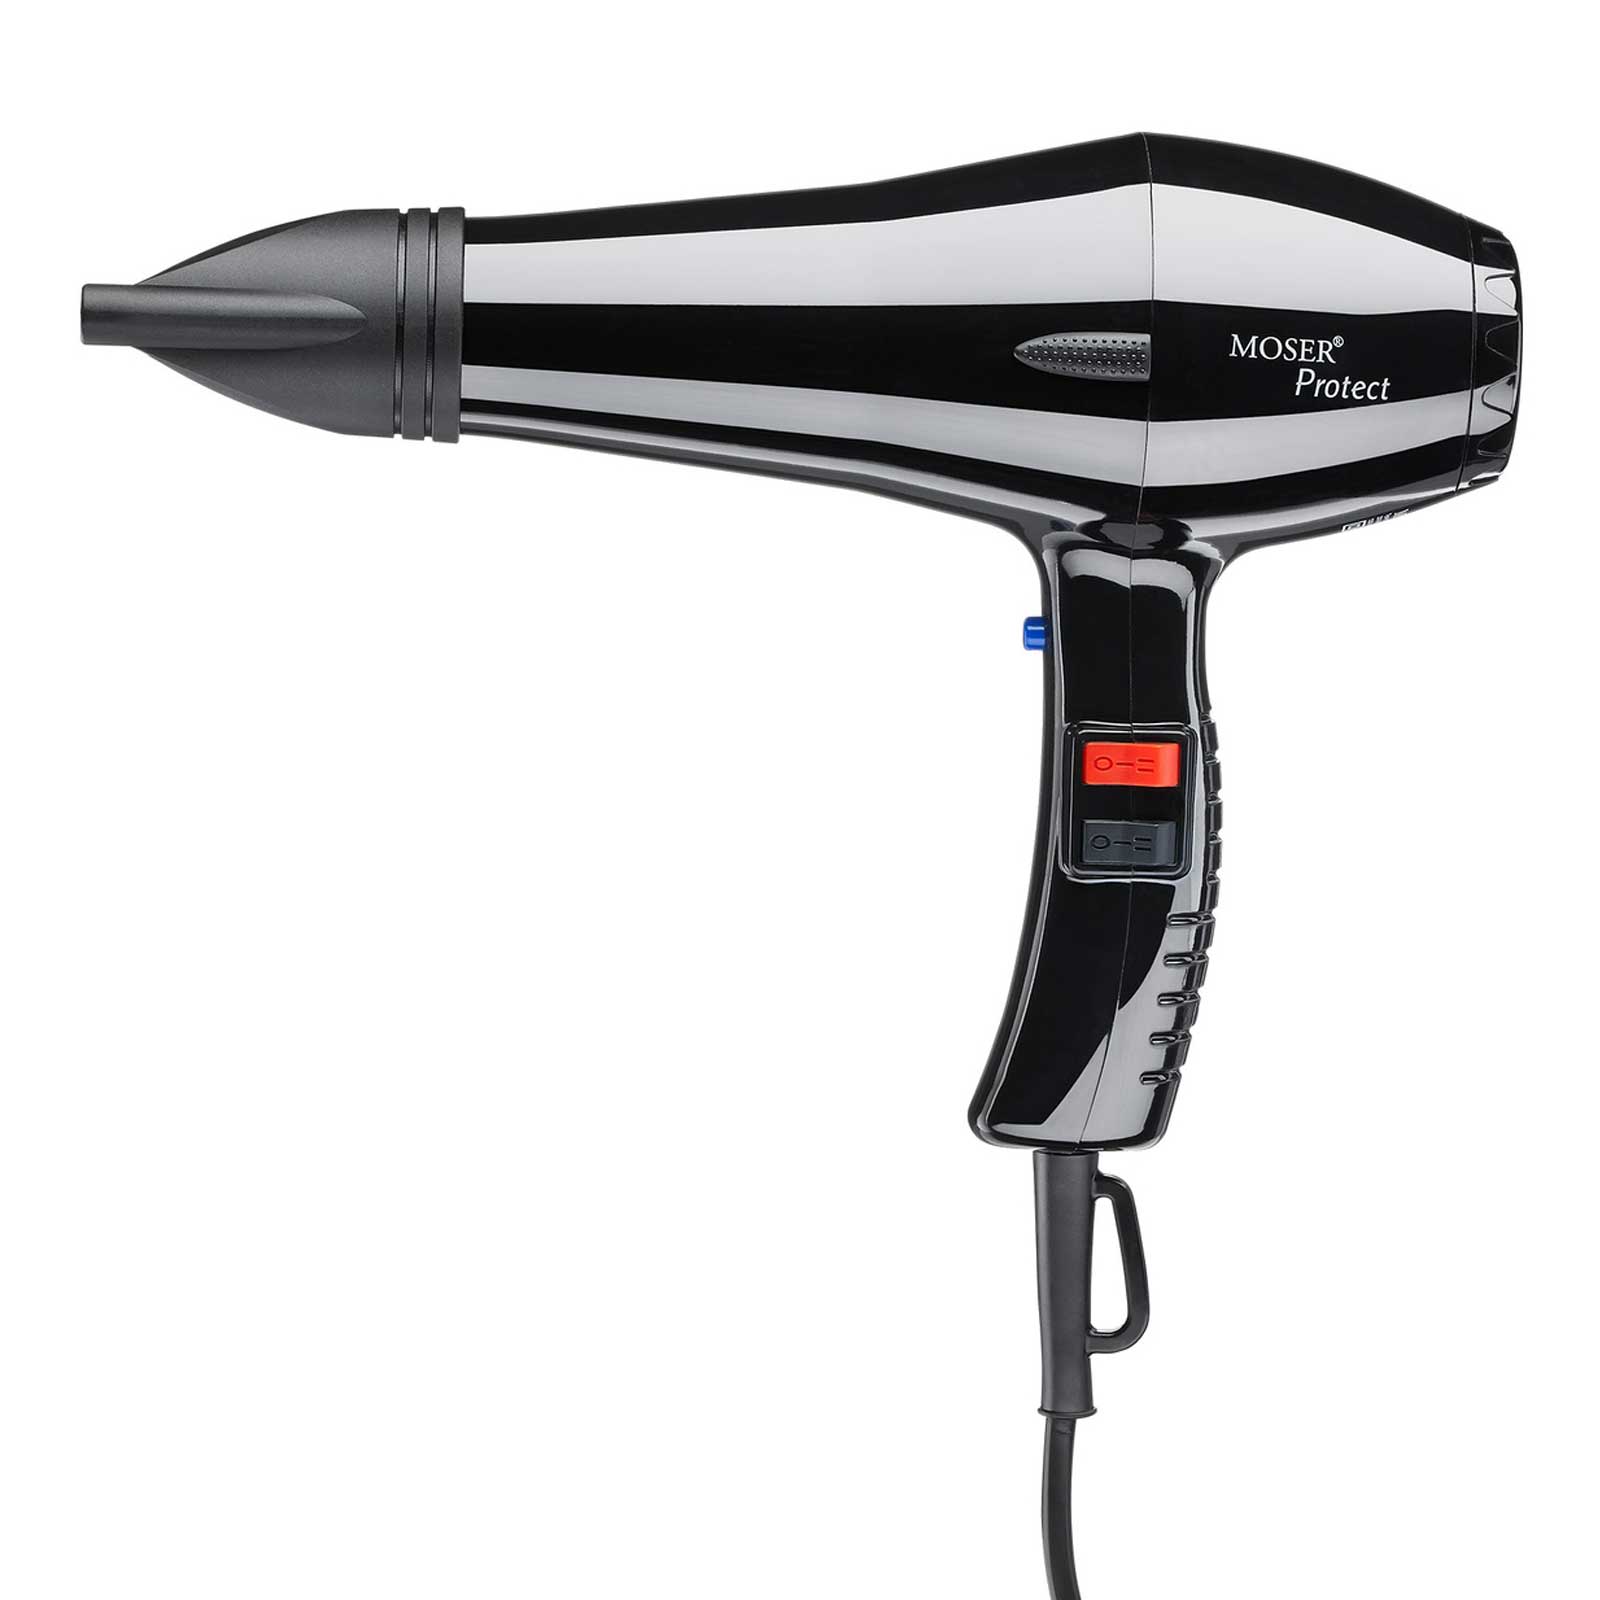 Moser hair dryer Protect 1500 W